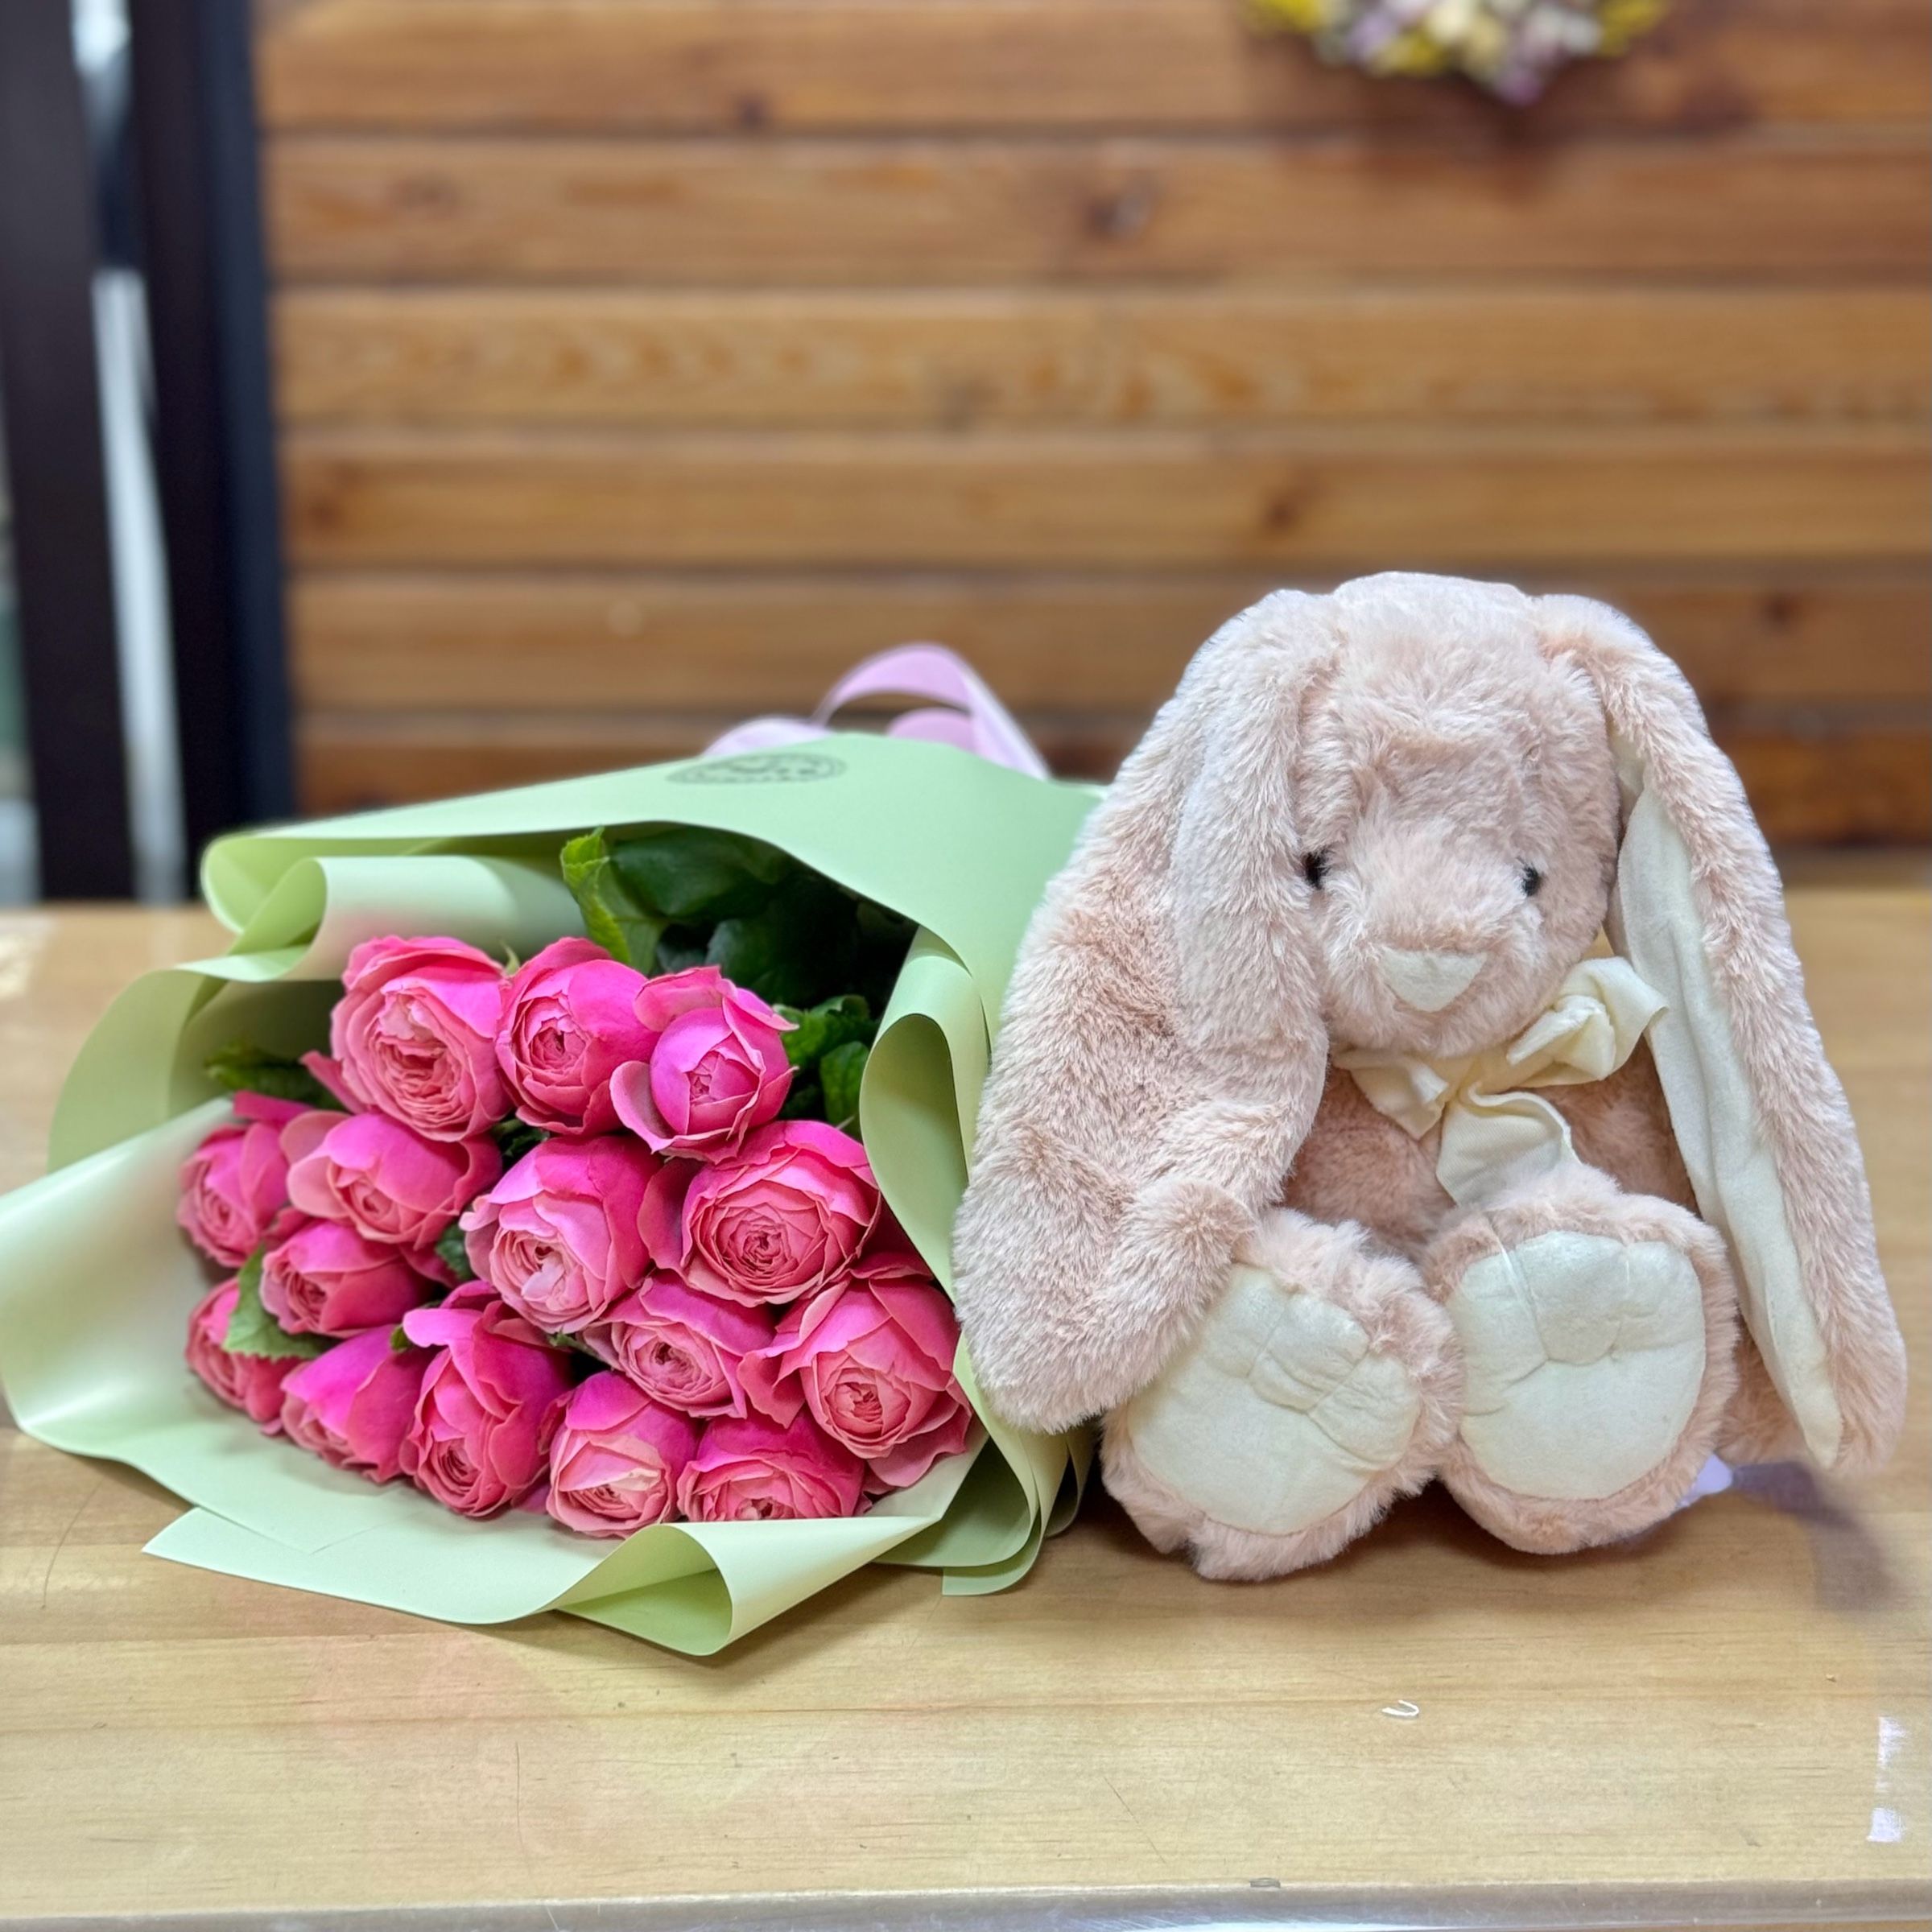 Pink roses and a bunny Marakesh